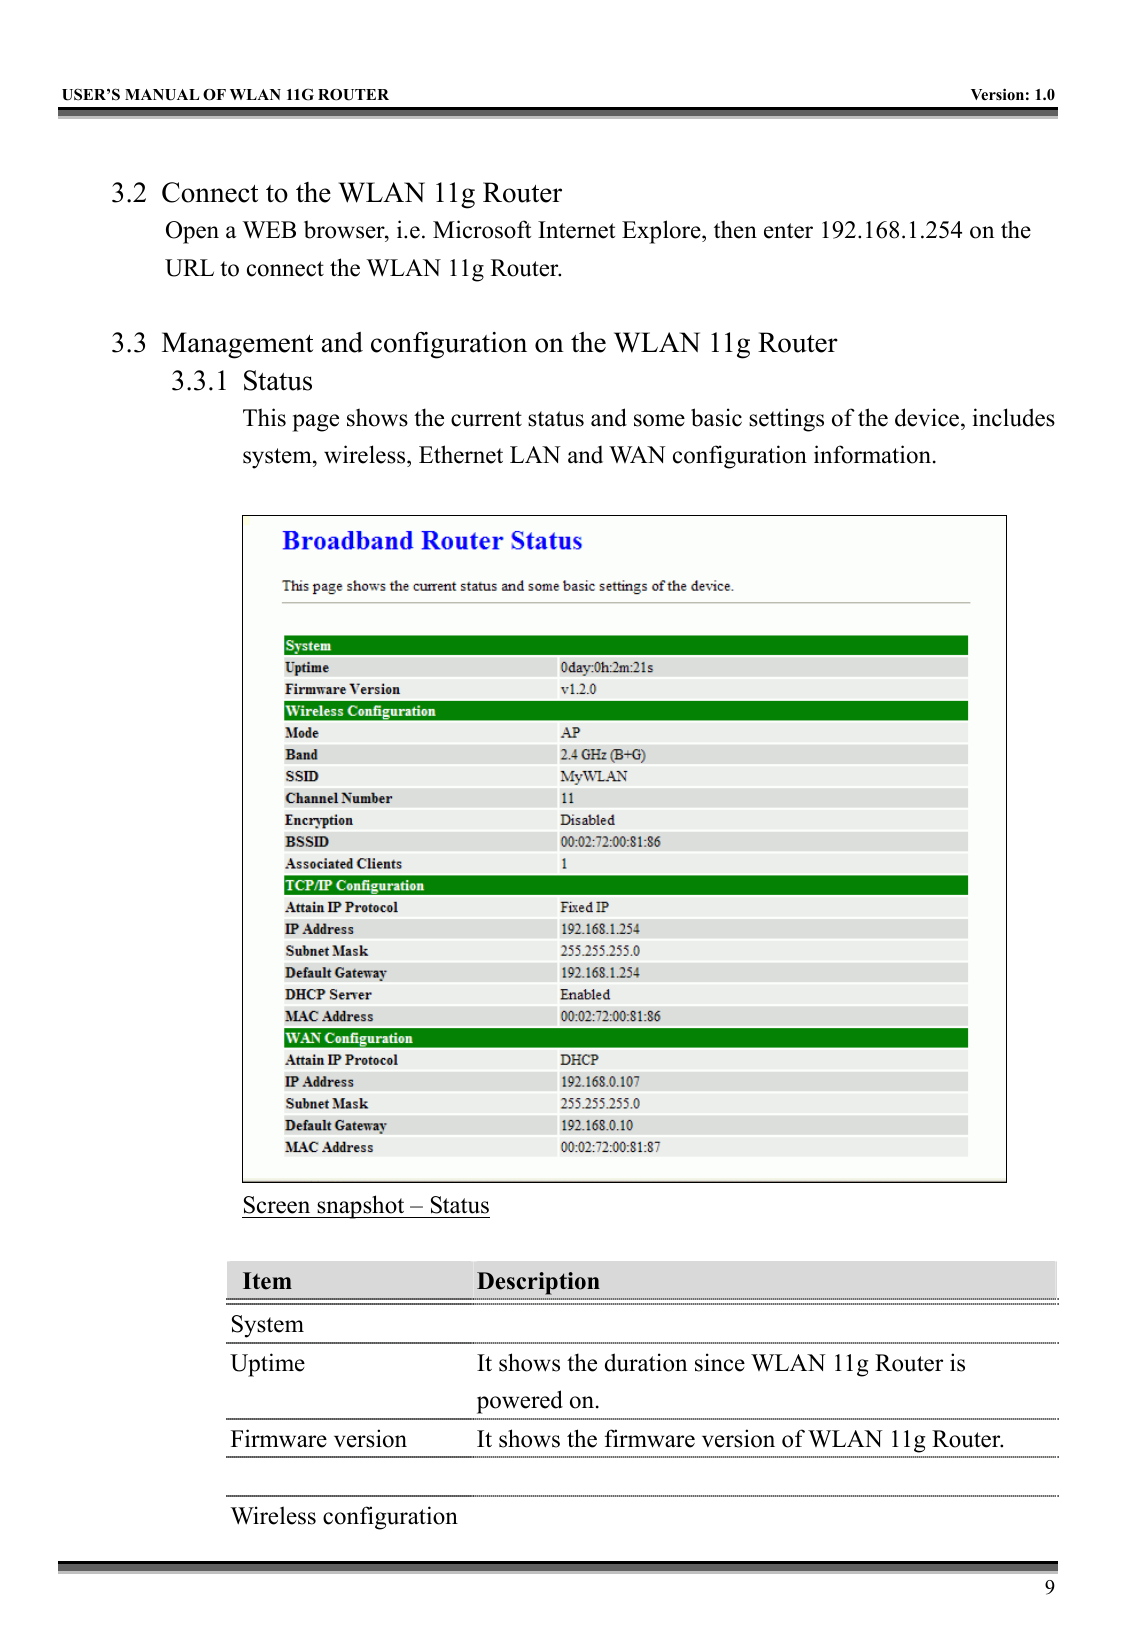   USER’S MANUAL OF WLAN 11G ROUTER    Version: 1.0     9  3.2  Connect to the WLAN 11g Router Open a WEB browser, i.e. Microsoft Internet Explore, then enter 192.168.1.254 on the URL to connect the WLAN 11g Router.  3.3  Management and configuration on the WLAN 11g Router 3.3.1 Status This page shows the current status and some basic settings of the device, includes system, wireless, Ethernet LAN and WAN configuration information.   Screen snapshot – Status  Item  Description   System  Uptime  It shows the duration since WLAN 11g Router is powered on.   Firmware version  It shows the firmware version of WLAN 11g Router.   Wireless configuration   